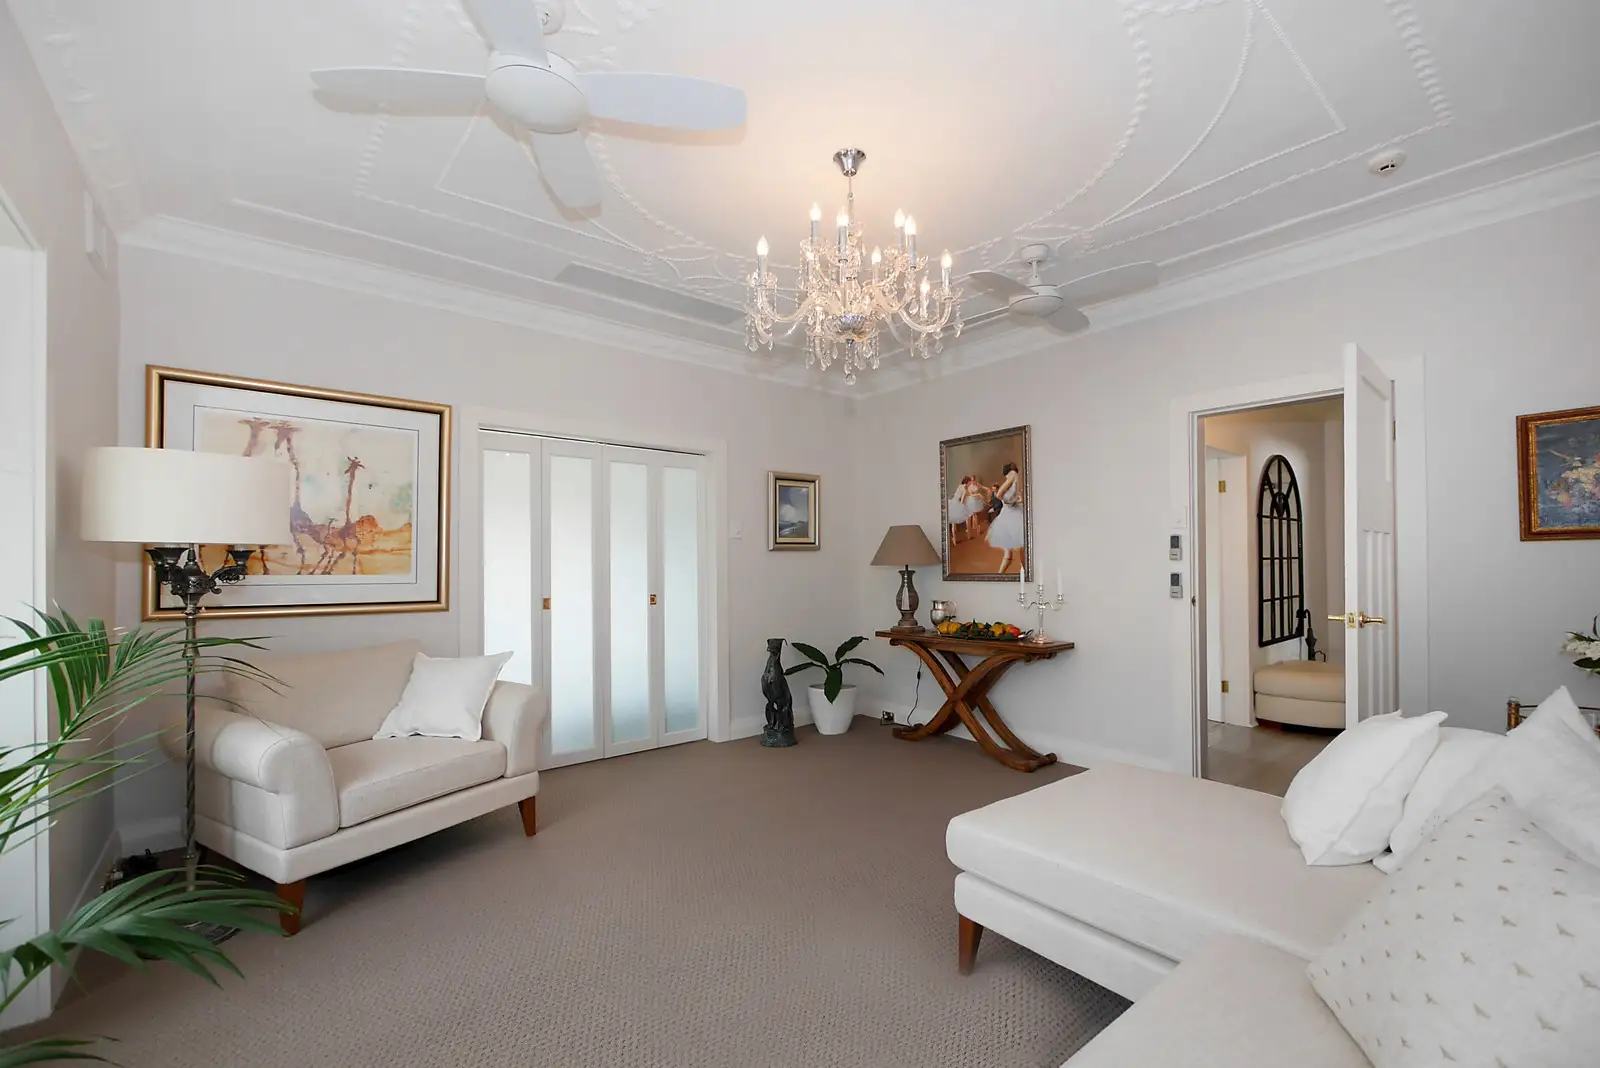 Photo #1: 6/106 Balfour Road, Bellevue Hill - Sold by Sydney Sotheby's International Realty